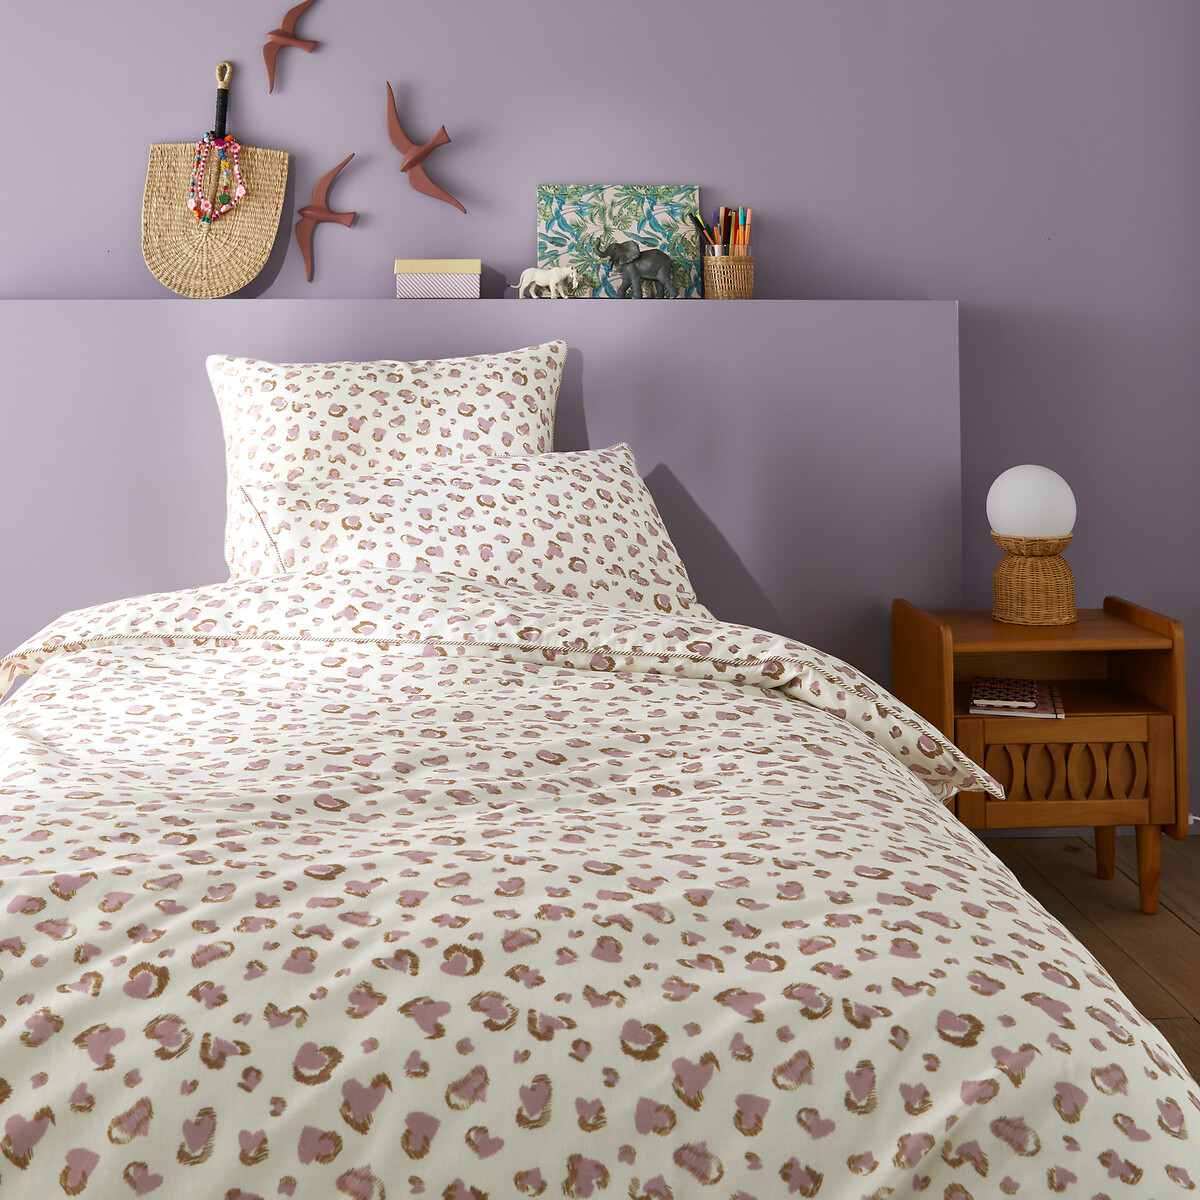 Sovaga Leopard 30% Recycled Cotton Duvet Cover